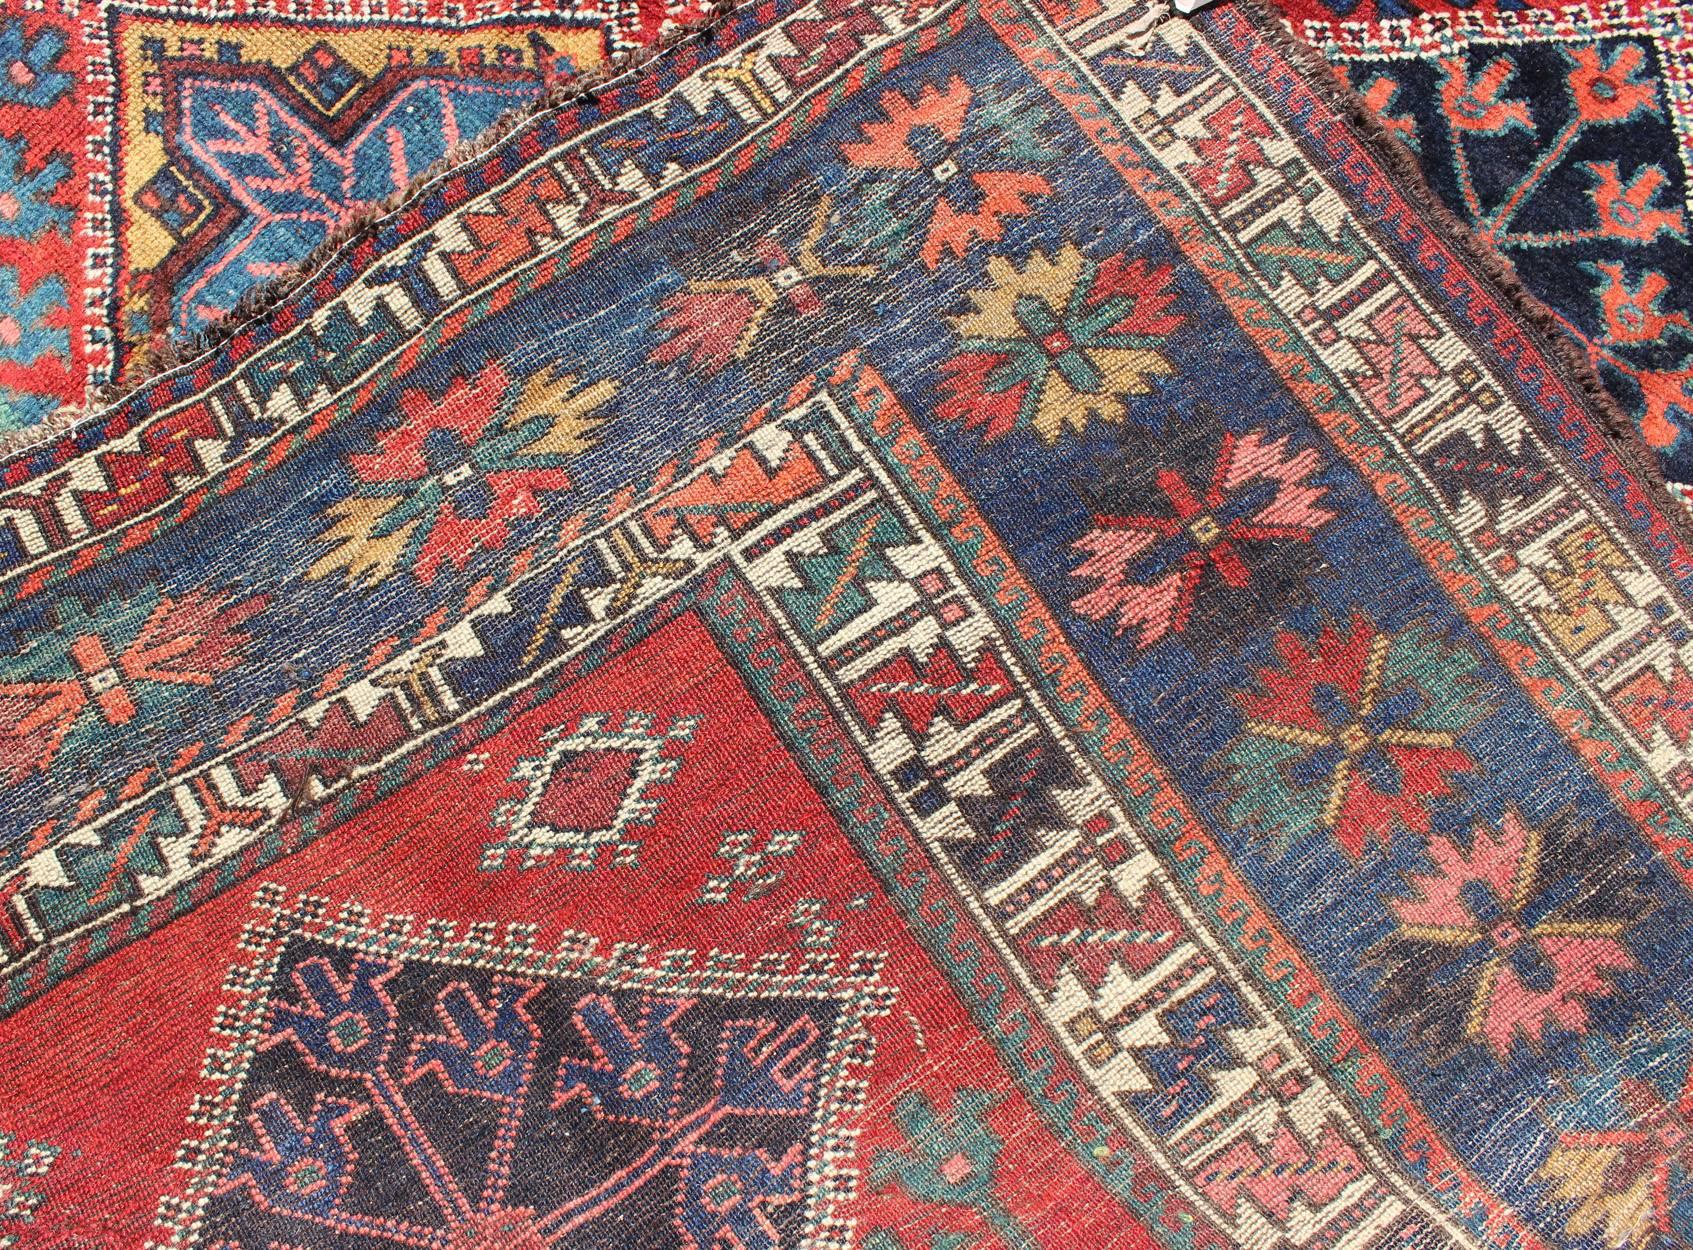 Antique Persian Qashqai Rug with Tulips, Diamond Patterns and Star Motifs In Good Condition For Sale In Atlanta, GA